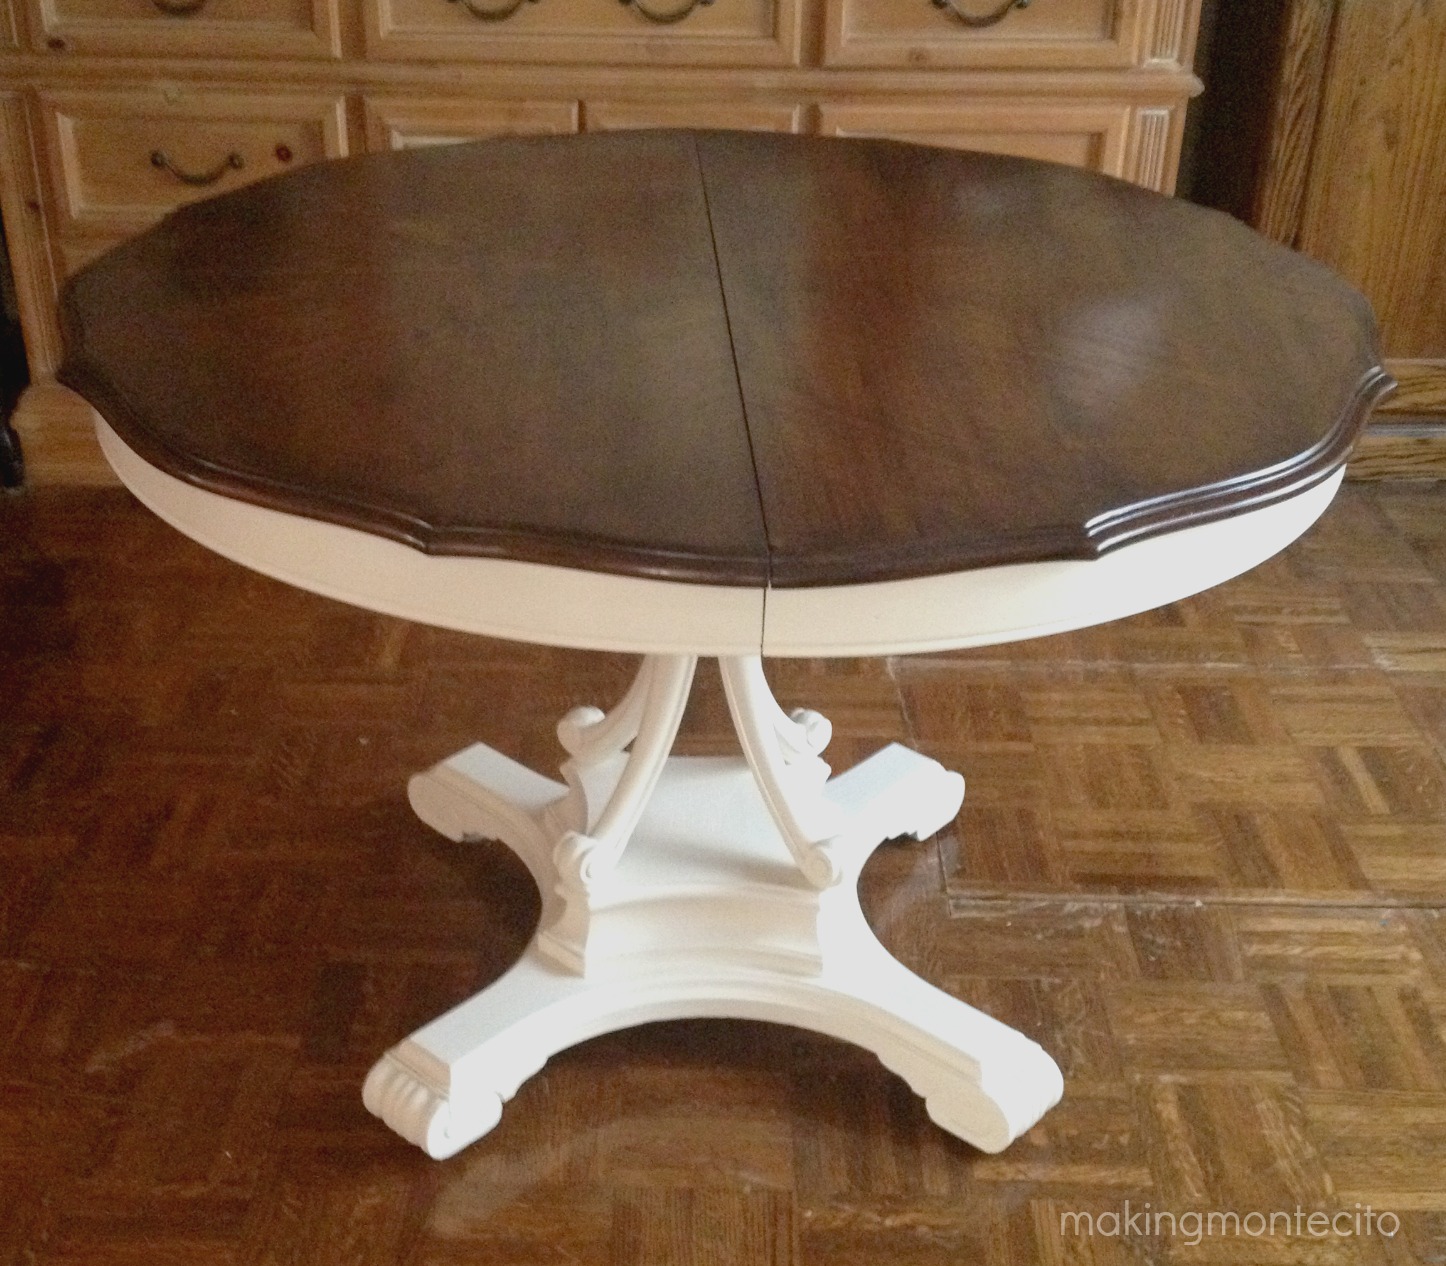 Vintage dining table updated - making montecito 5